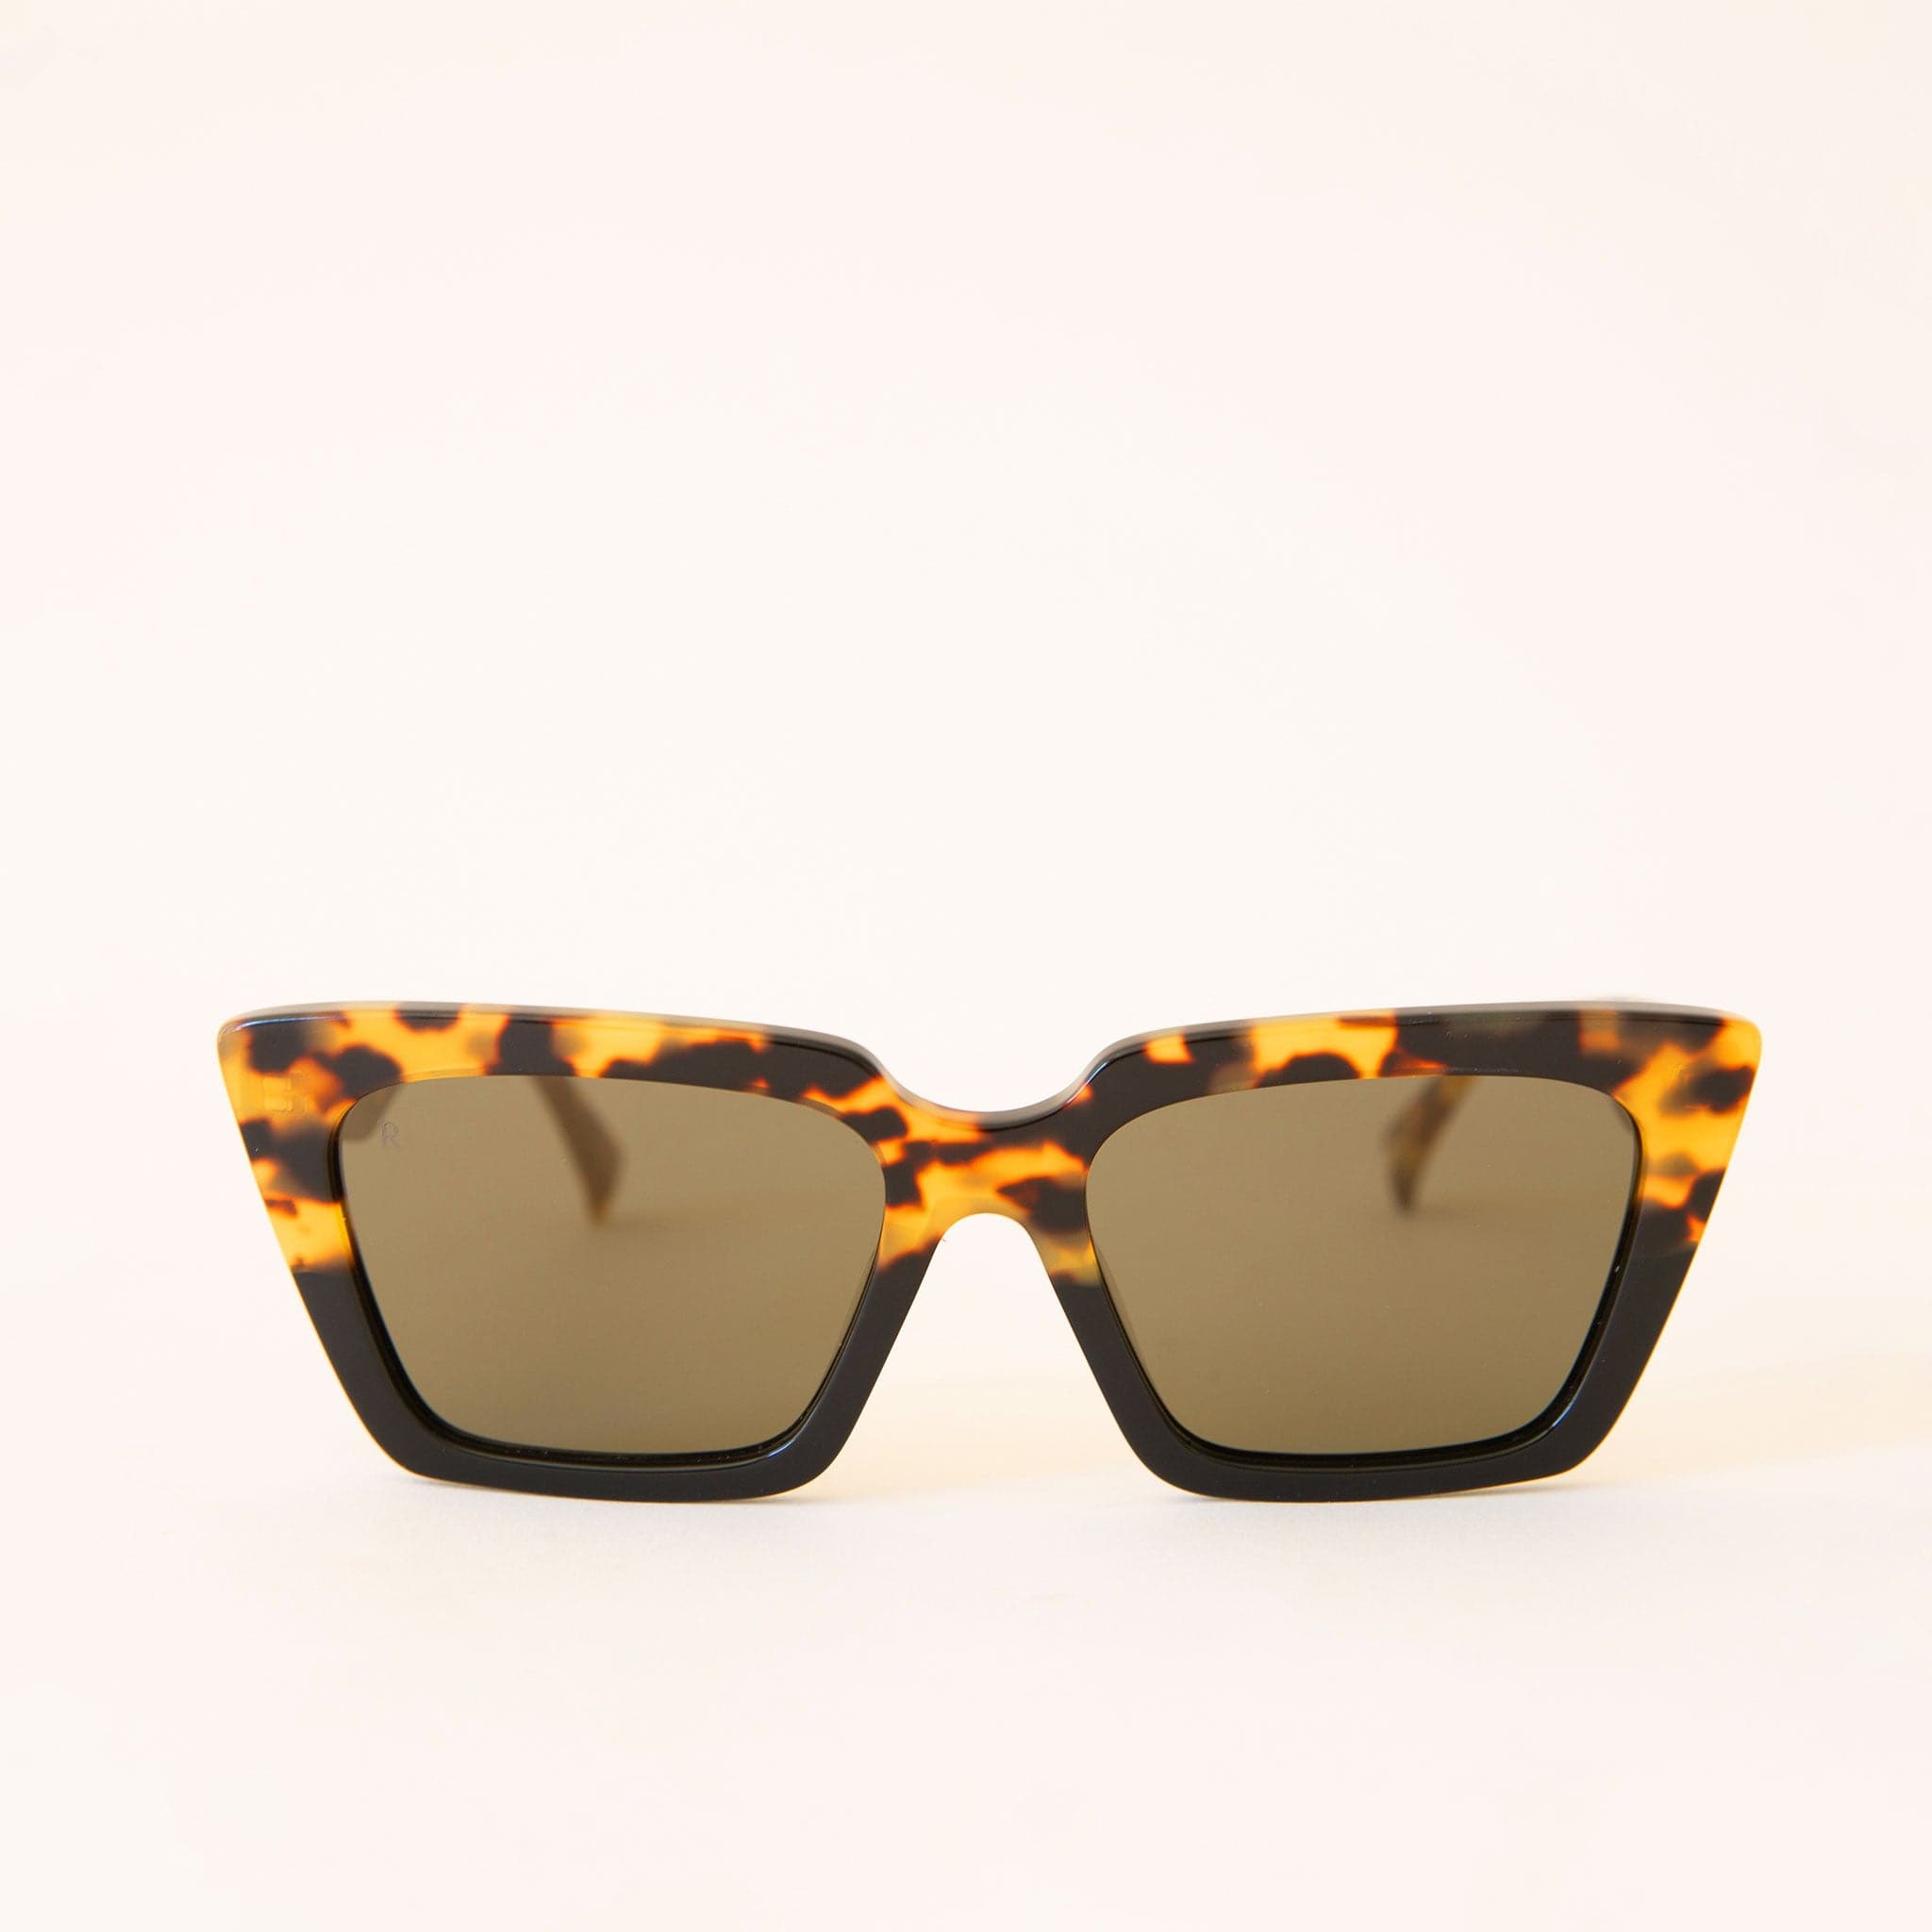 Pair of two toned tortoise and black sunglasses with a geometric cat eye frame shape and dark grey lenses. 